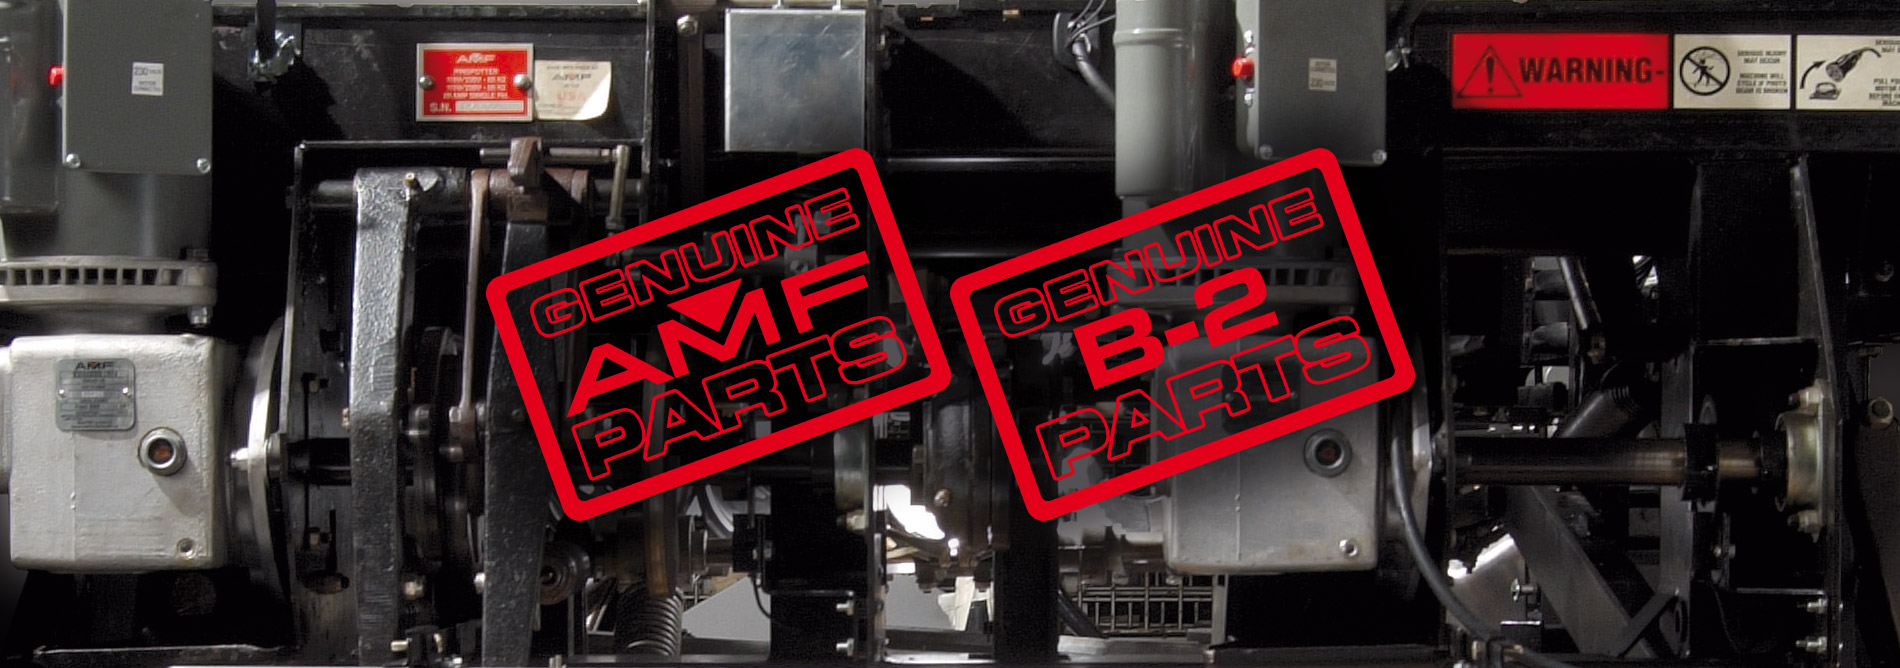 Bowling-QubicaAMF-genuine-parts-banner.jpg